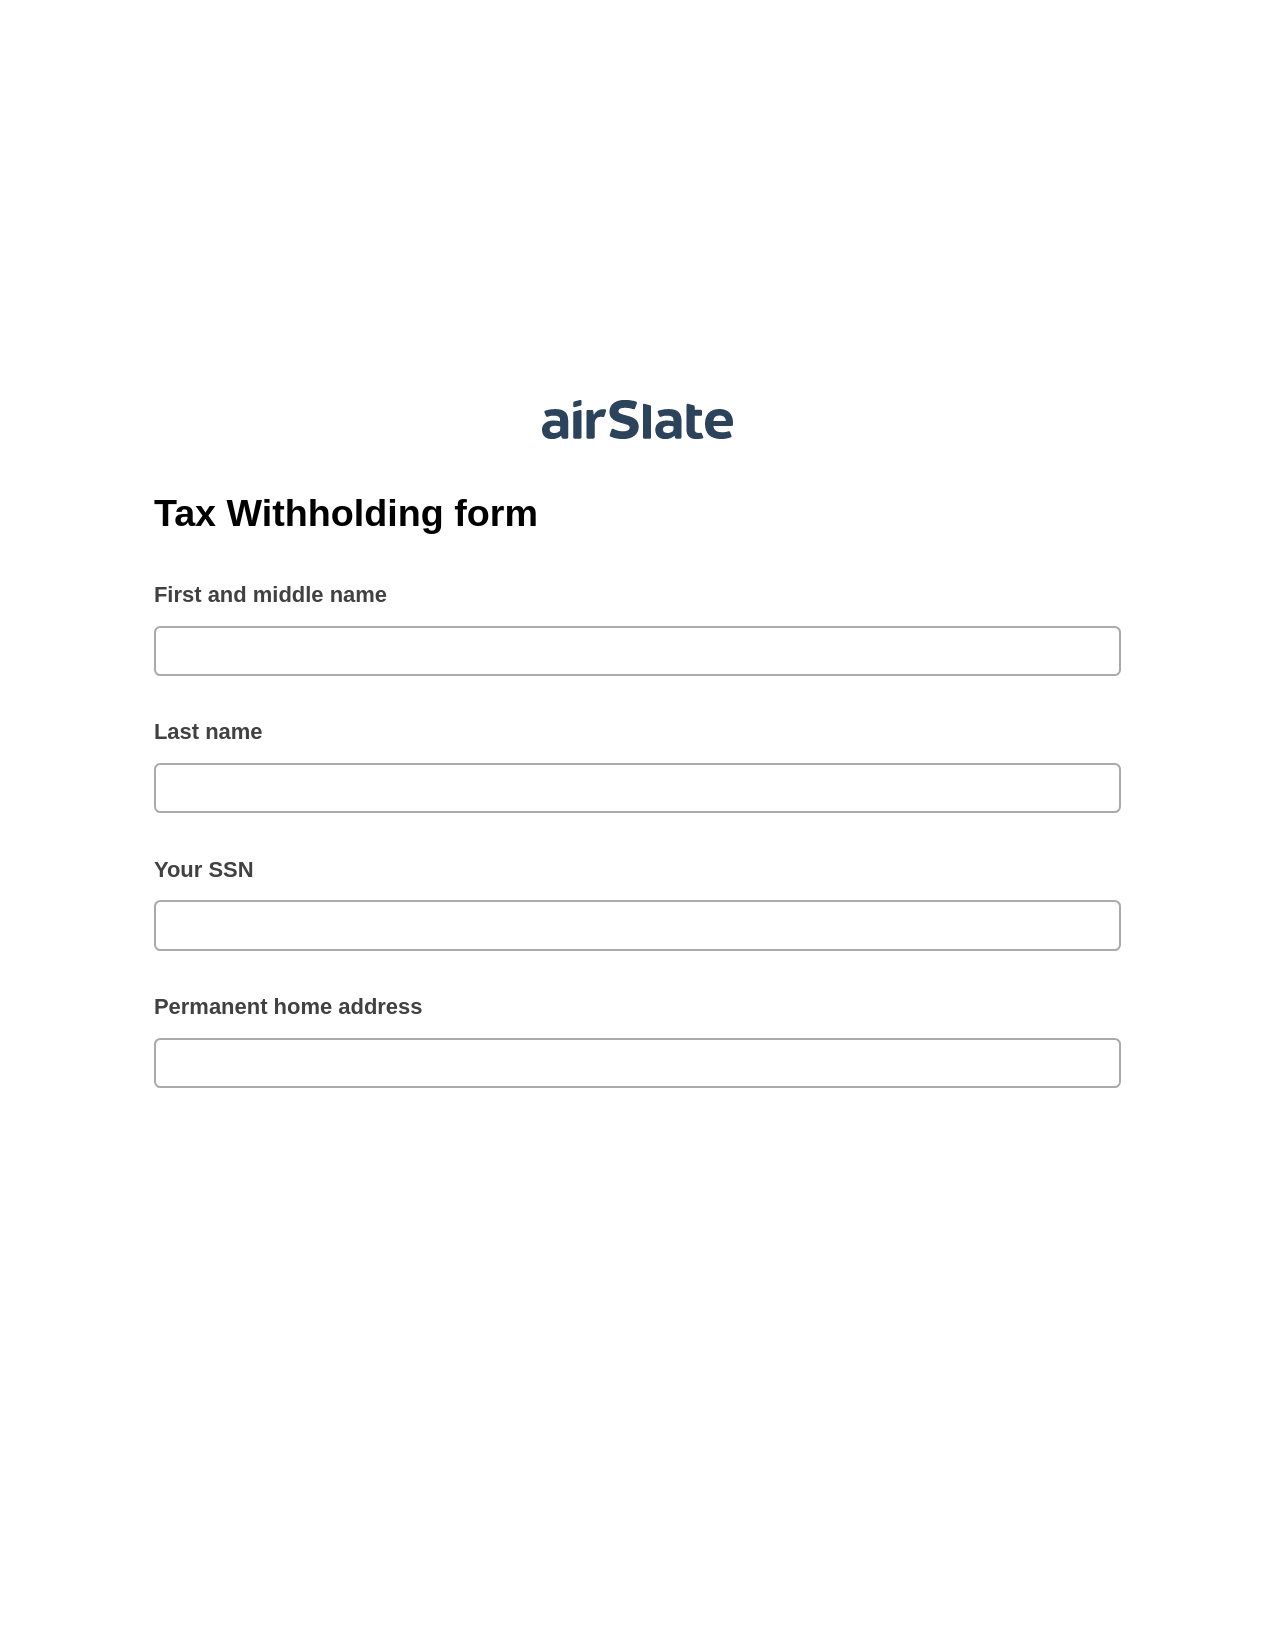 Multirole Tax Withholding form Pre-fill Slate from MS Dynamics 365 Records Bot, Send a Slate to MS Dynamics 365 Contact Bot, Export to Google Sheet Bot